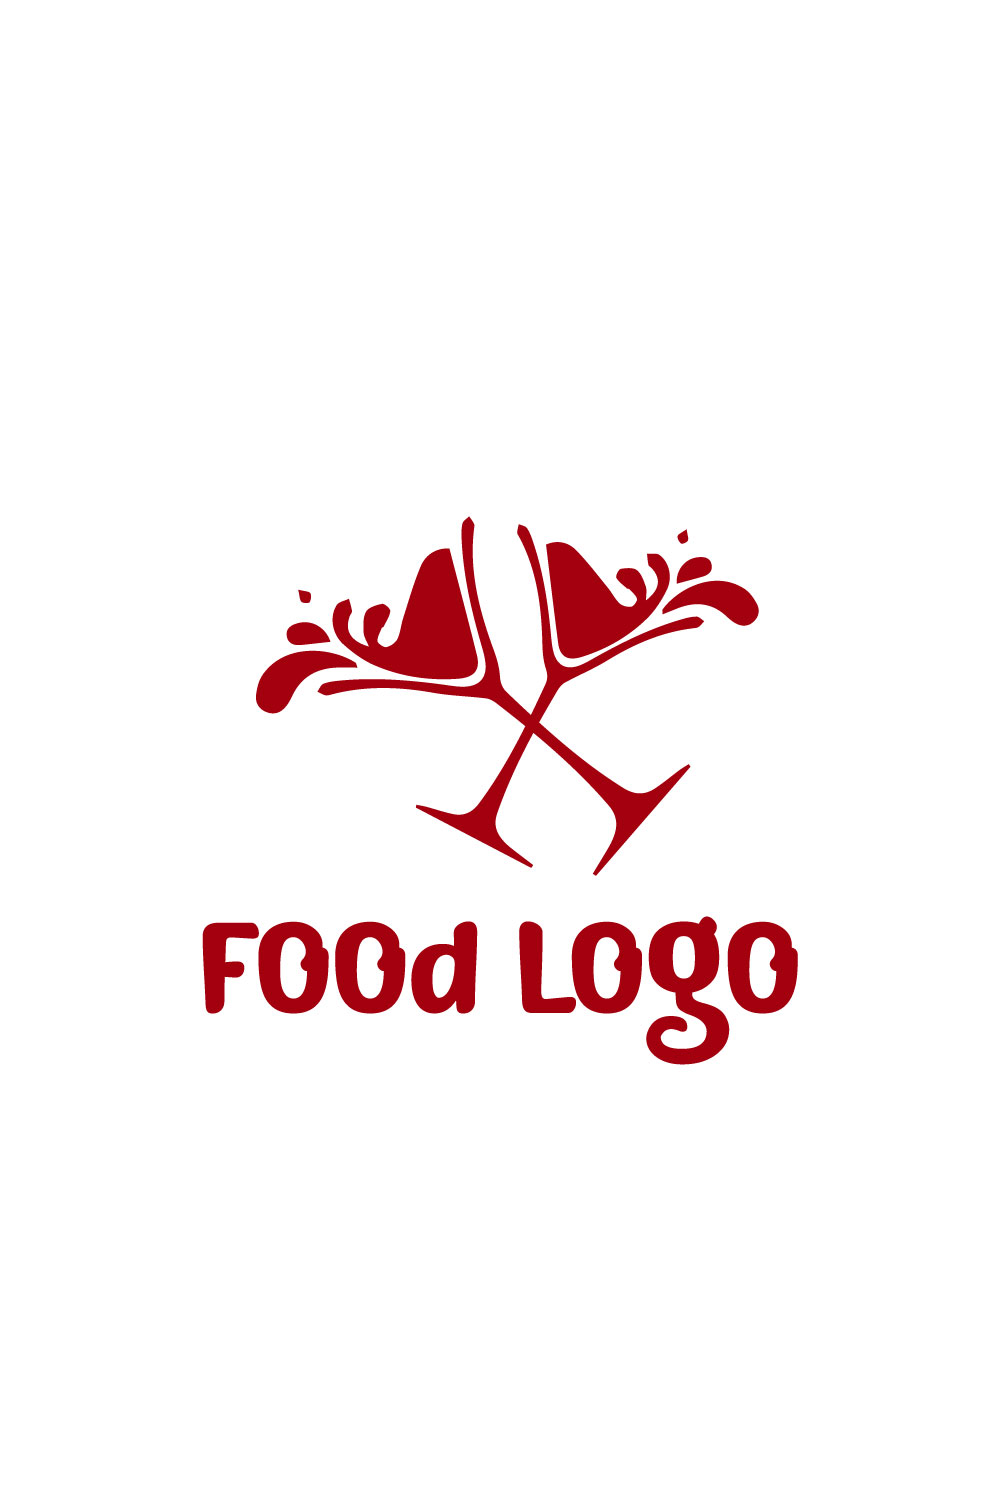 Free food logo great pinterest preview image.